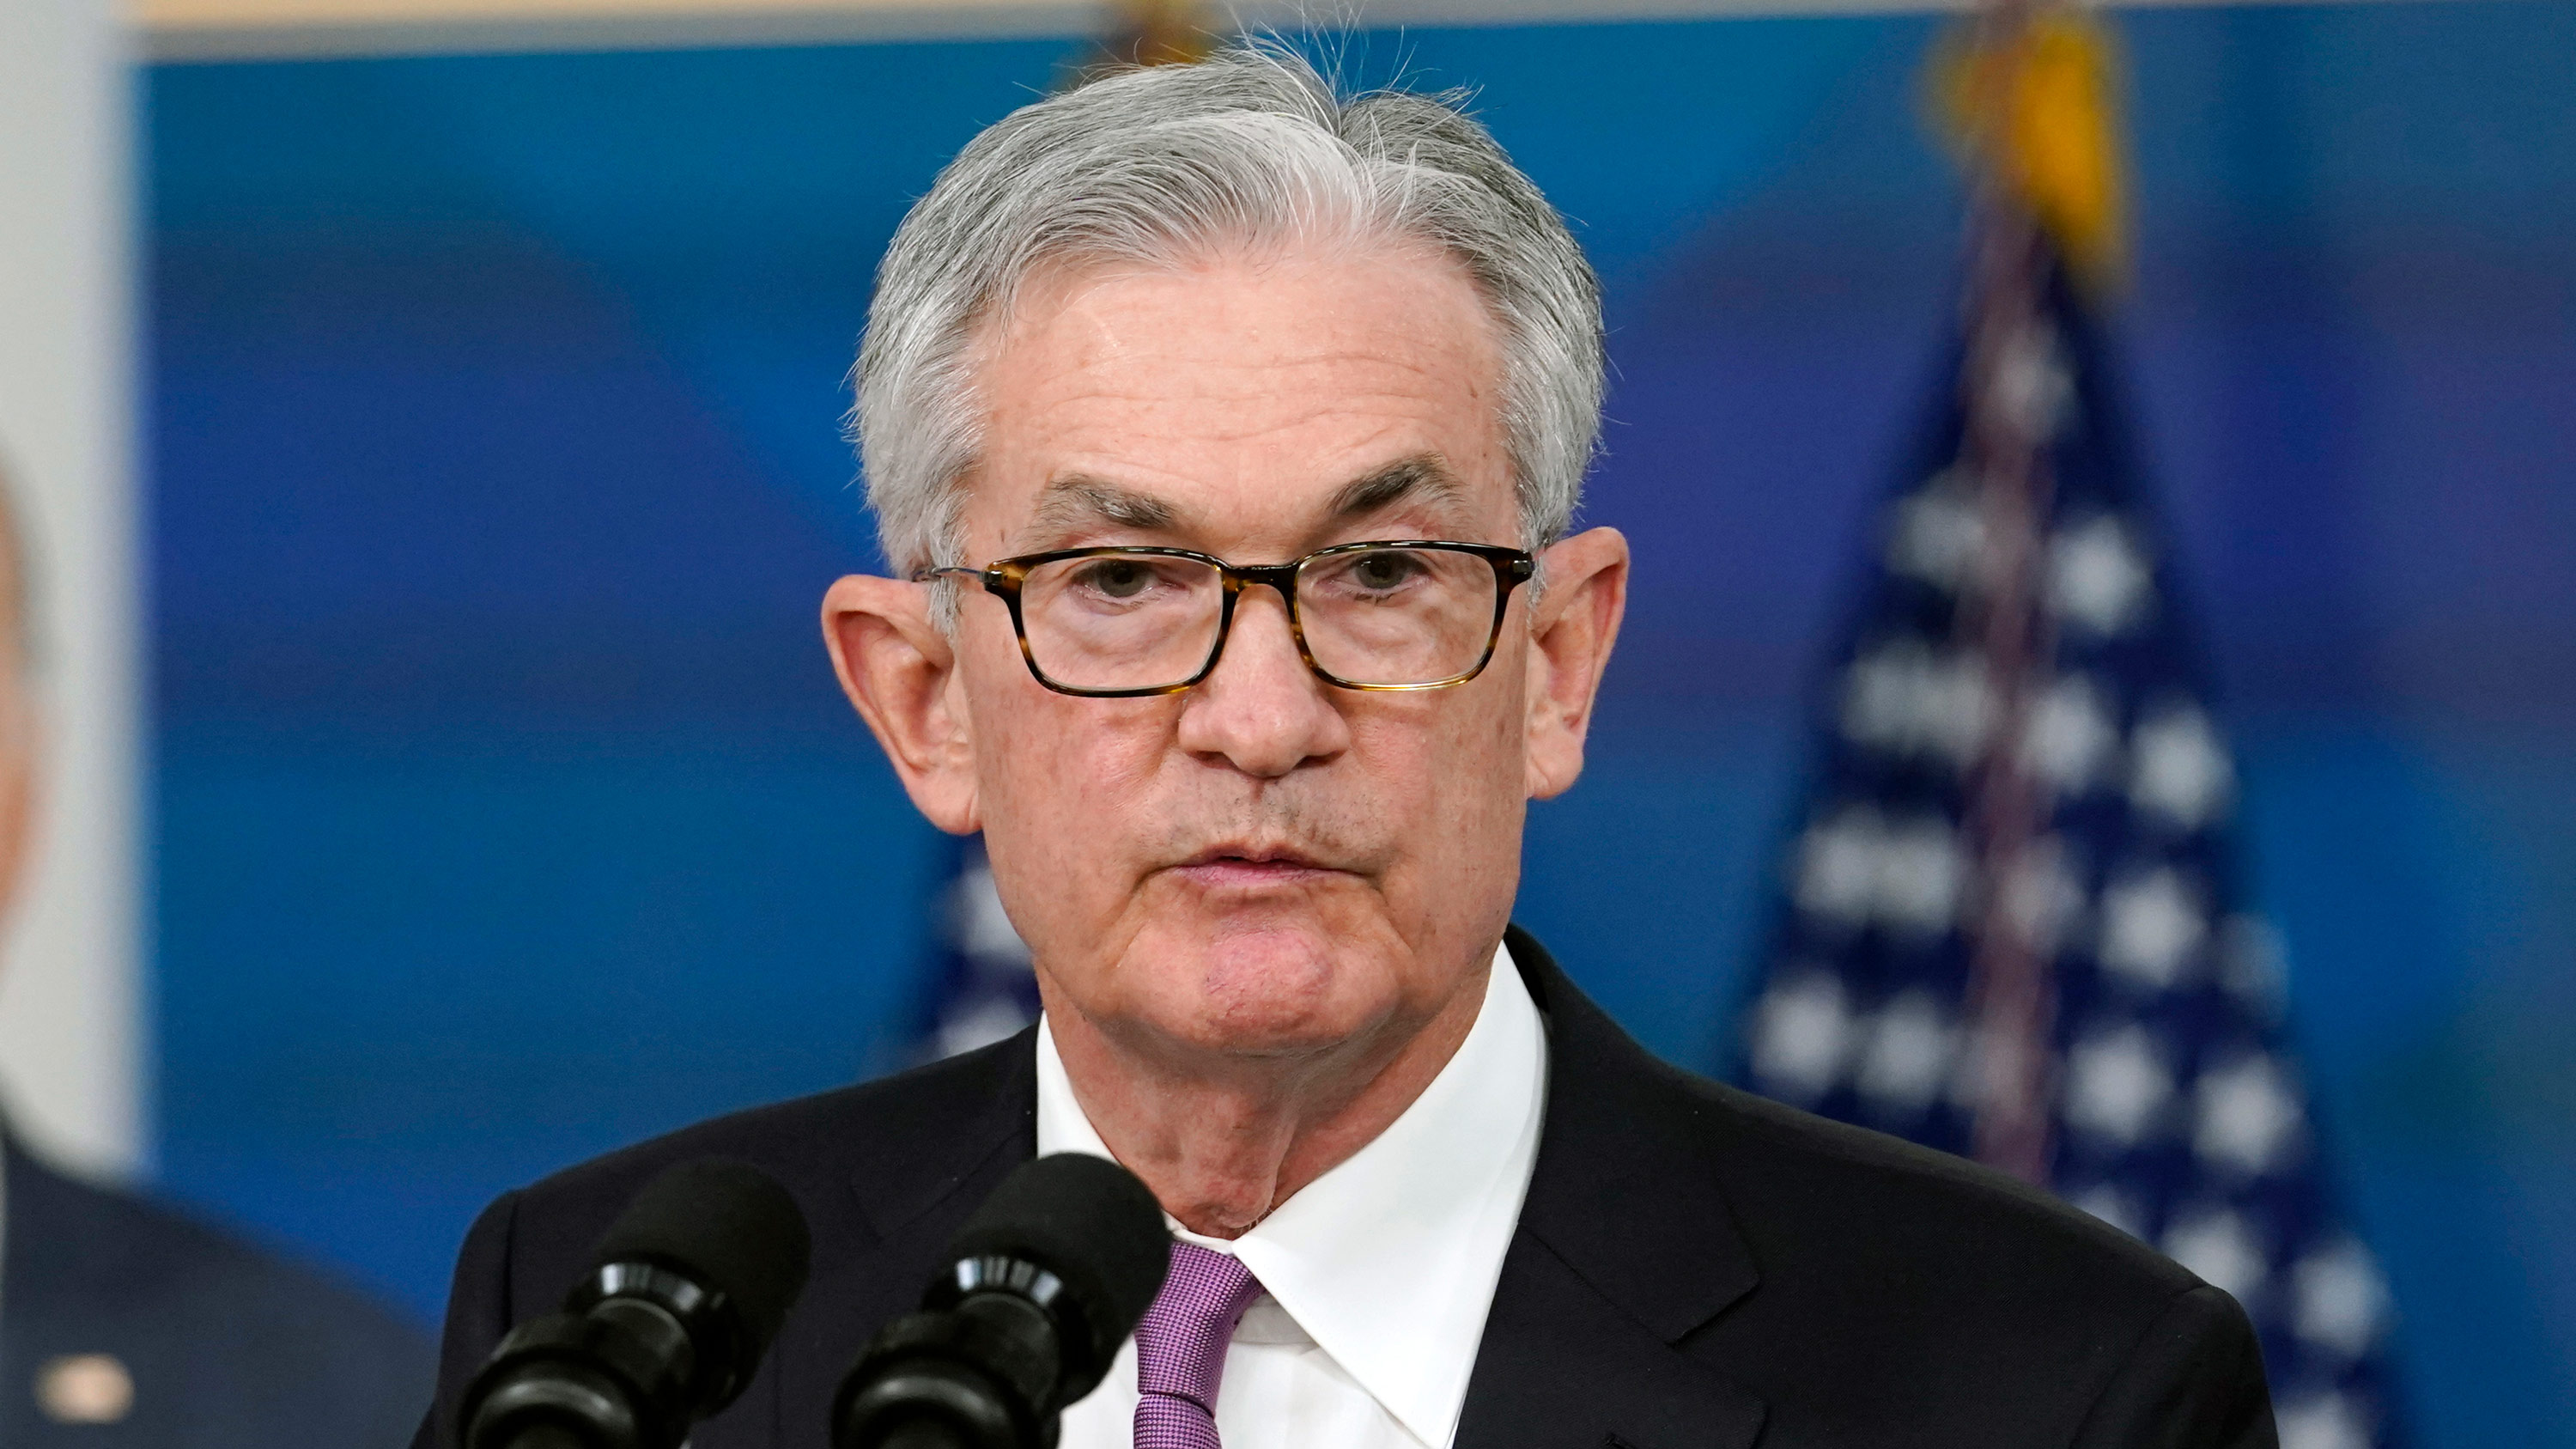 Federal Reserve Chairman Jerome Powell speaks during an event in the South Court Auditorium of the White House complex in Washington, DC, on November 22.